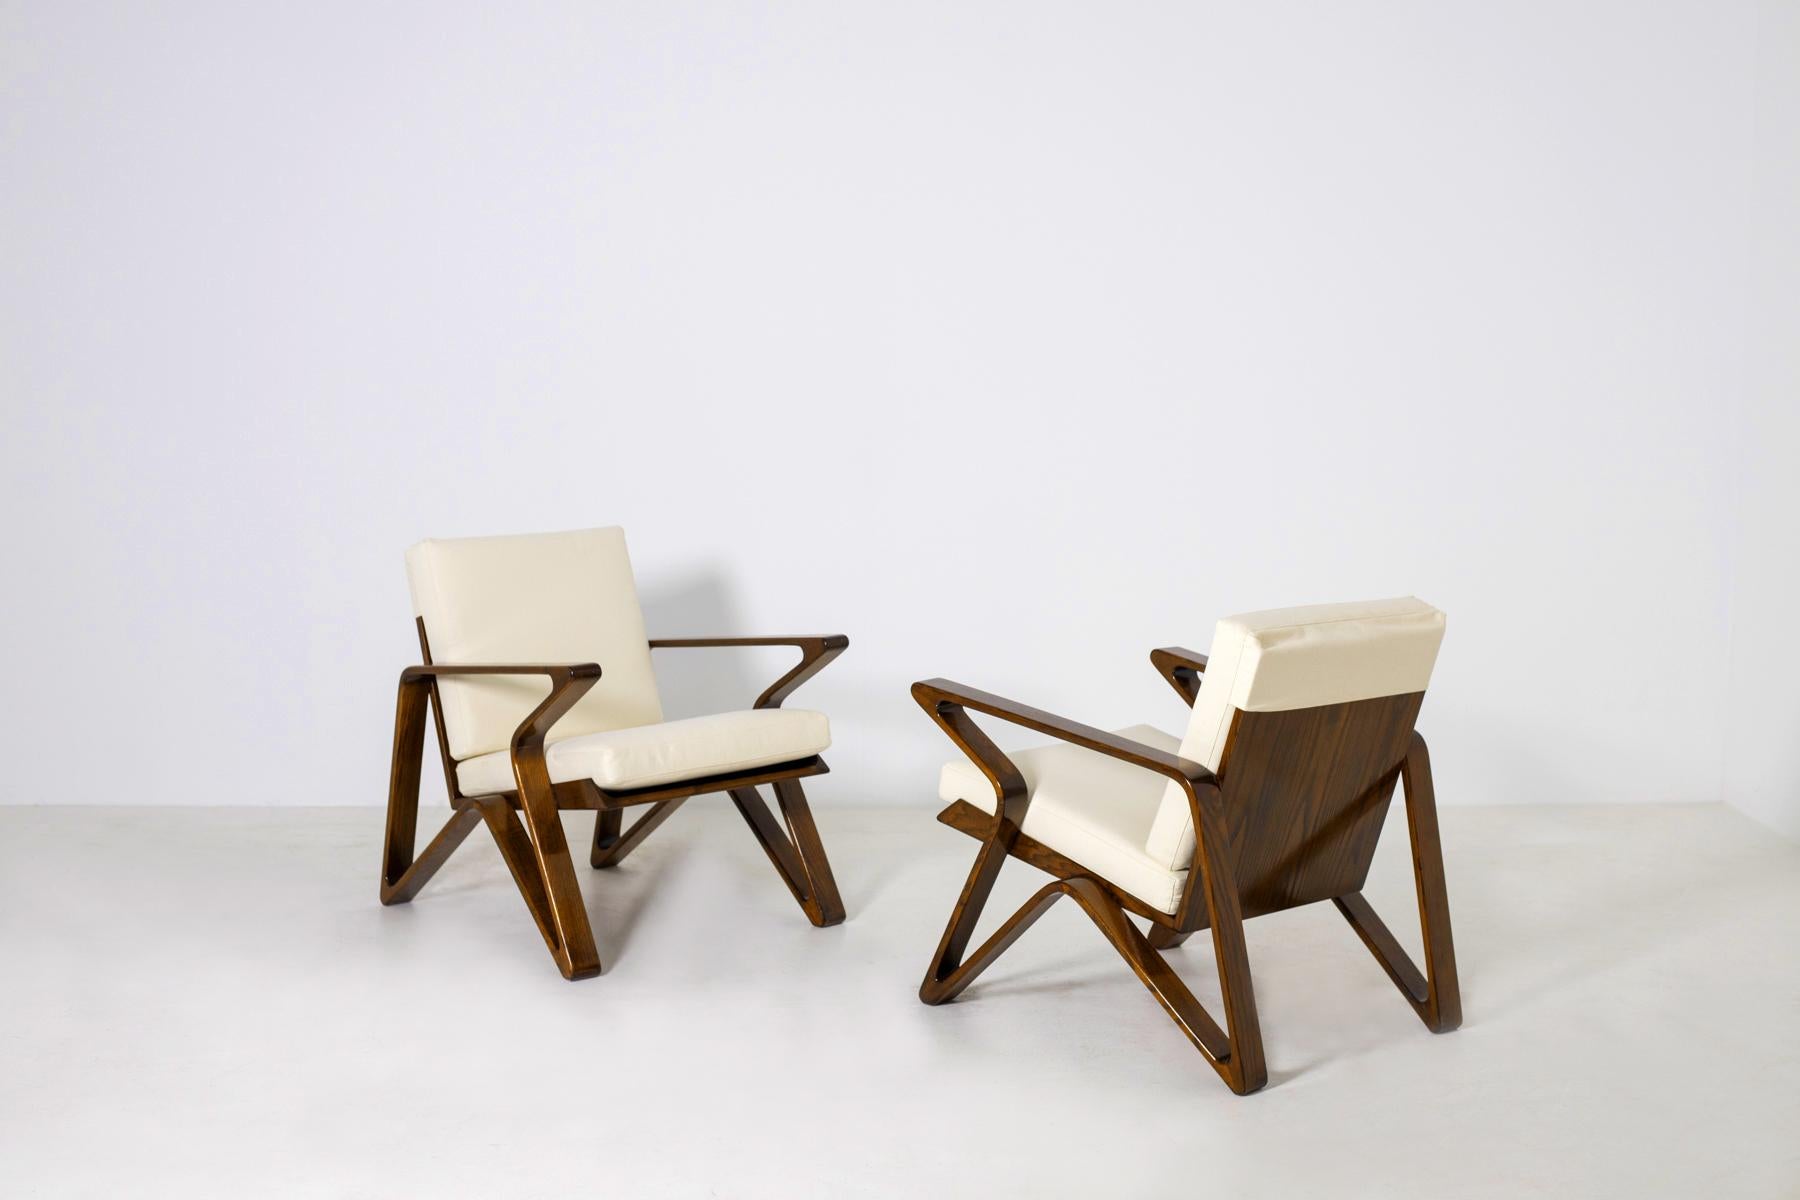 Superb pair of 20th century Italian armchairs. The pair of armchairs were made of fine quality walnut wood. Its futuristic Z shape creates movement and shape to the armchair. Its fine wood reinforces the concept of Italian excellence. Its seat and